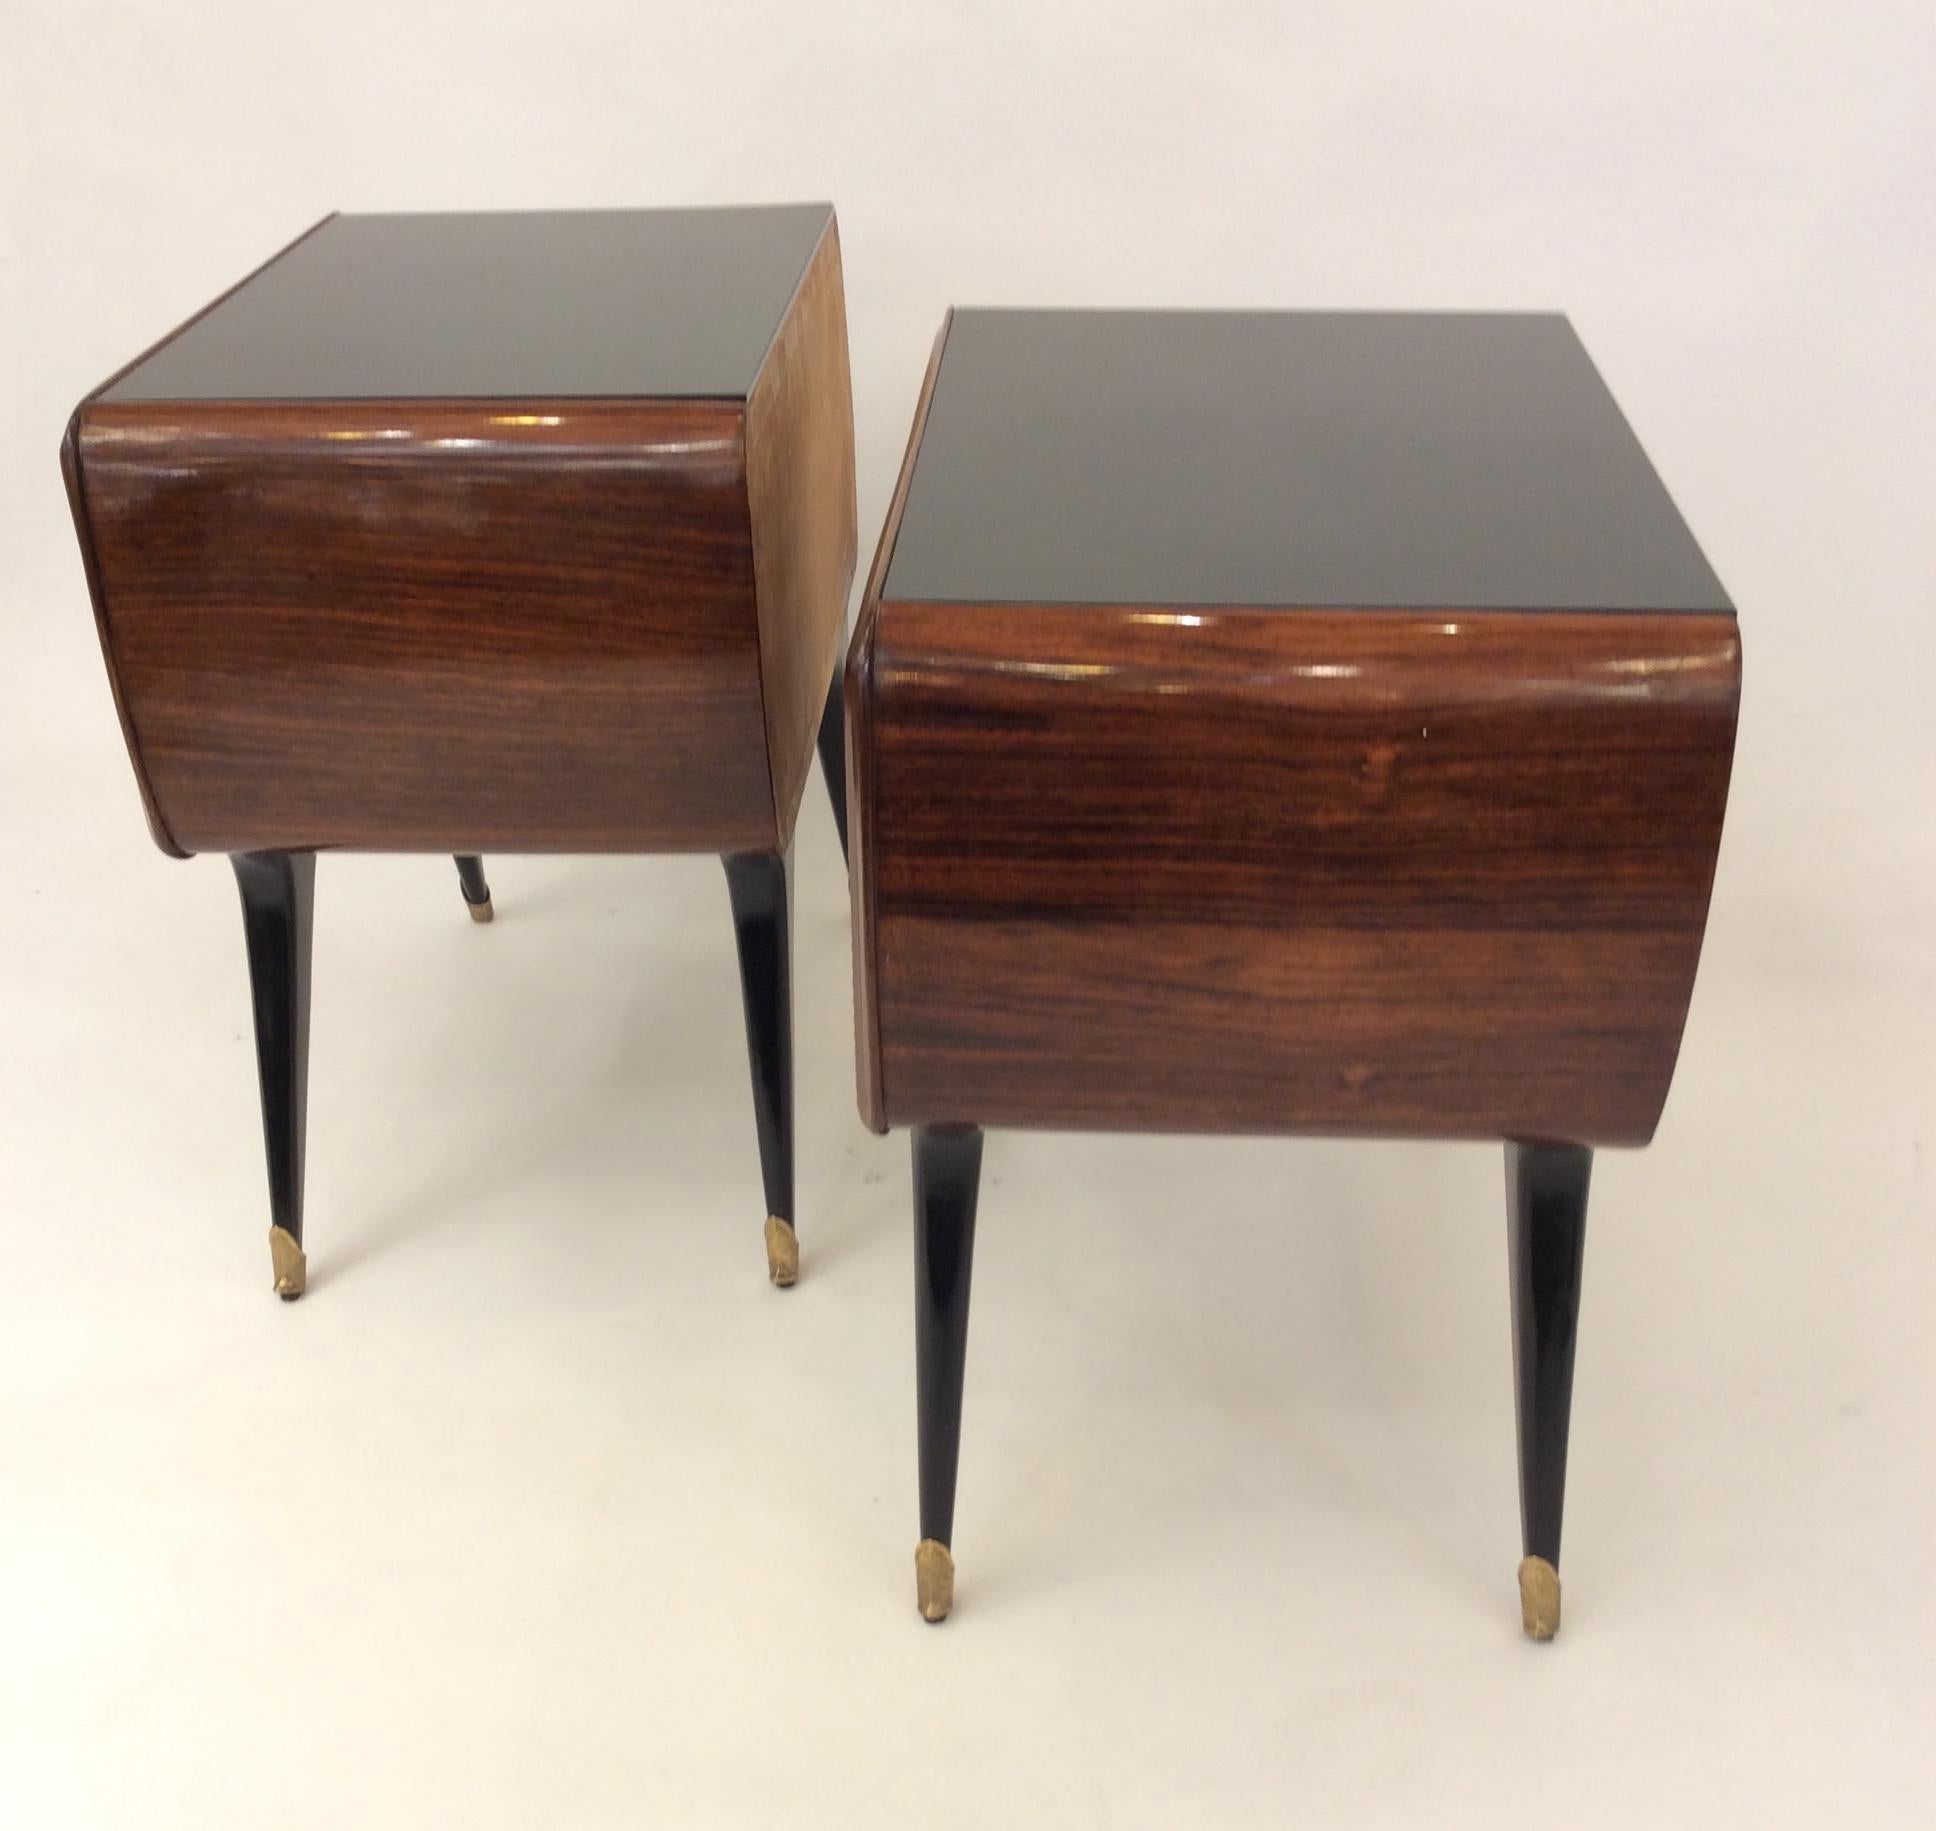 Pair of Italian Nightstands in the Style of Gio Ponti, circa 1950 For Sale 12